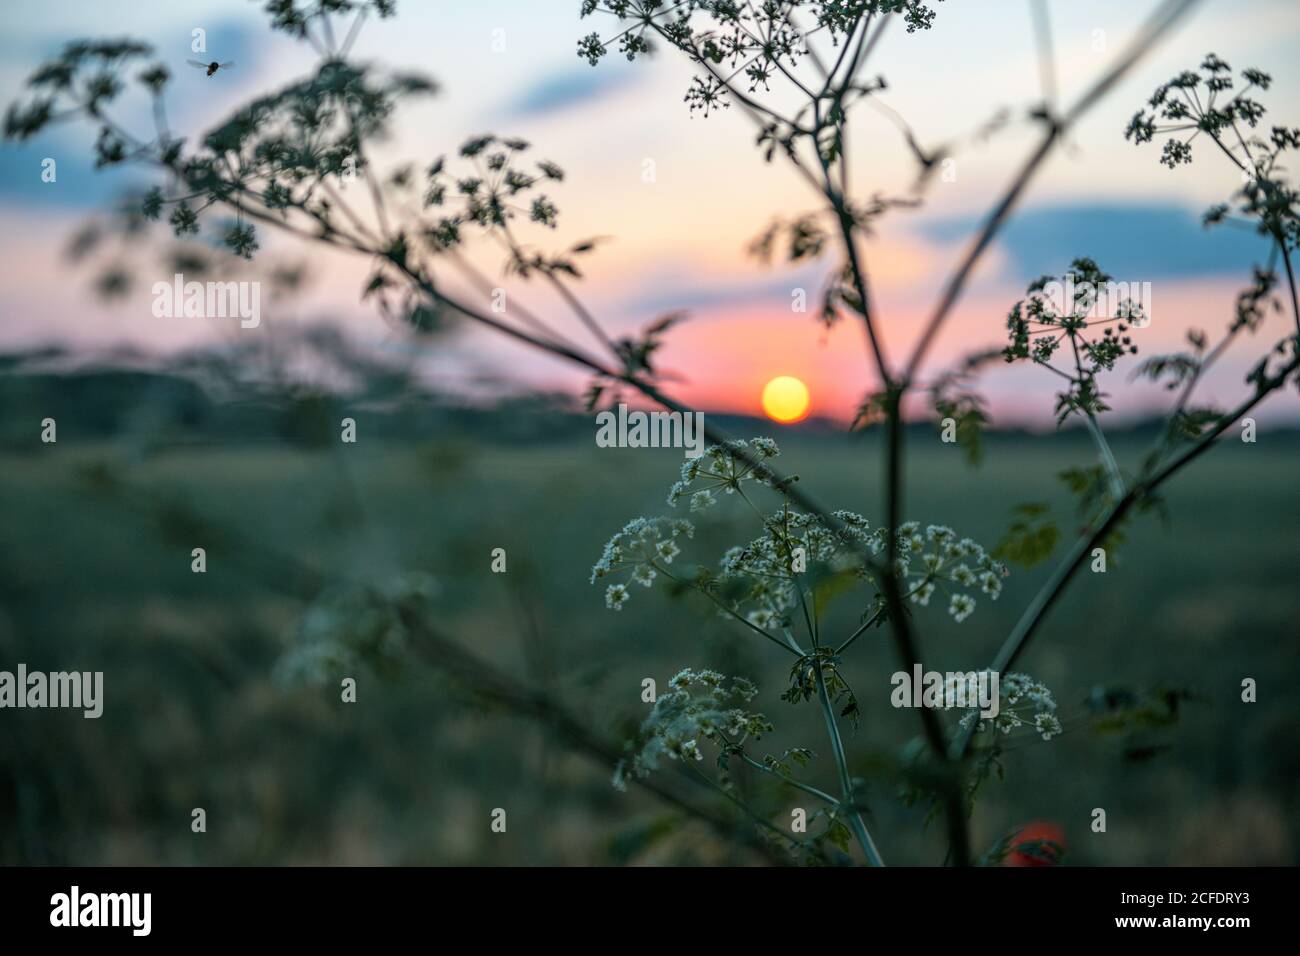 Sunset mood at the edge of the field with daisies in the foreground Stock Photo